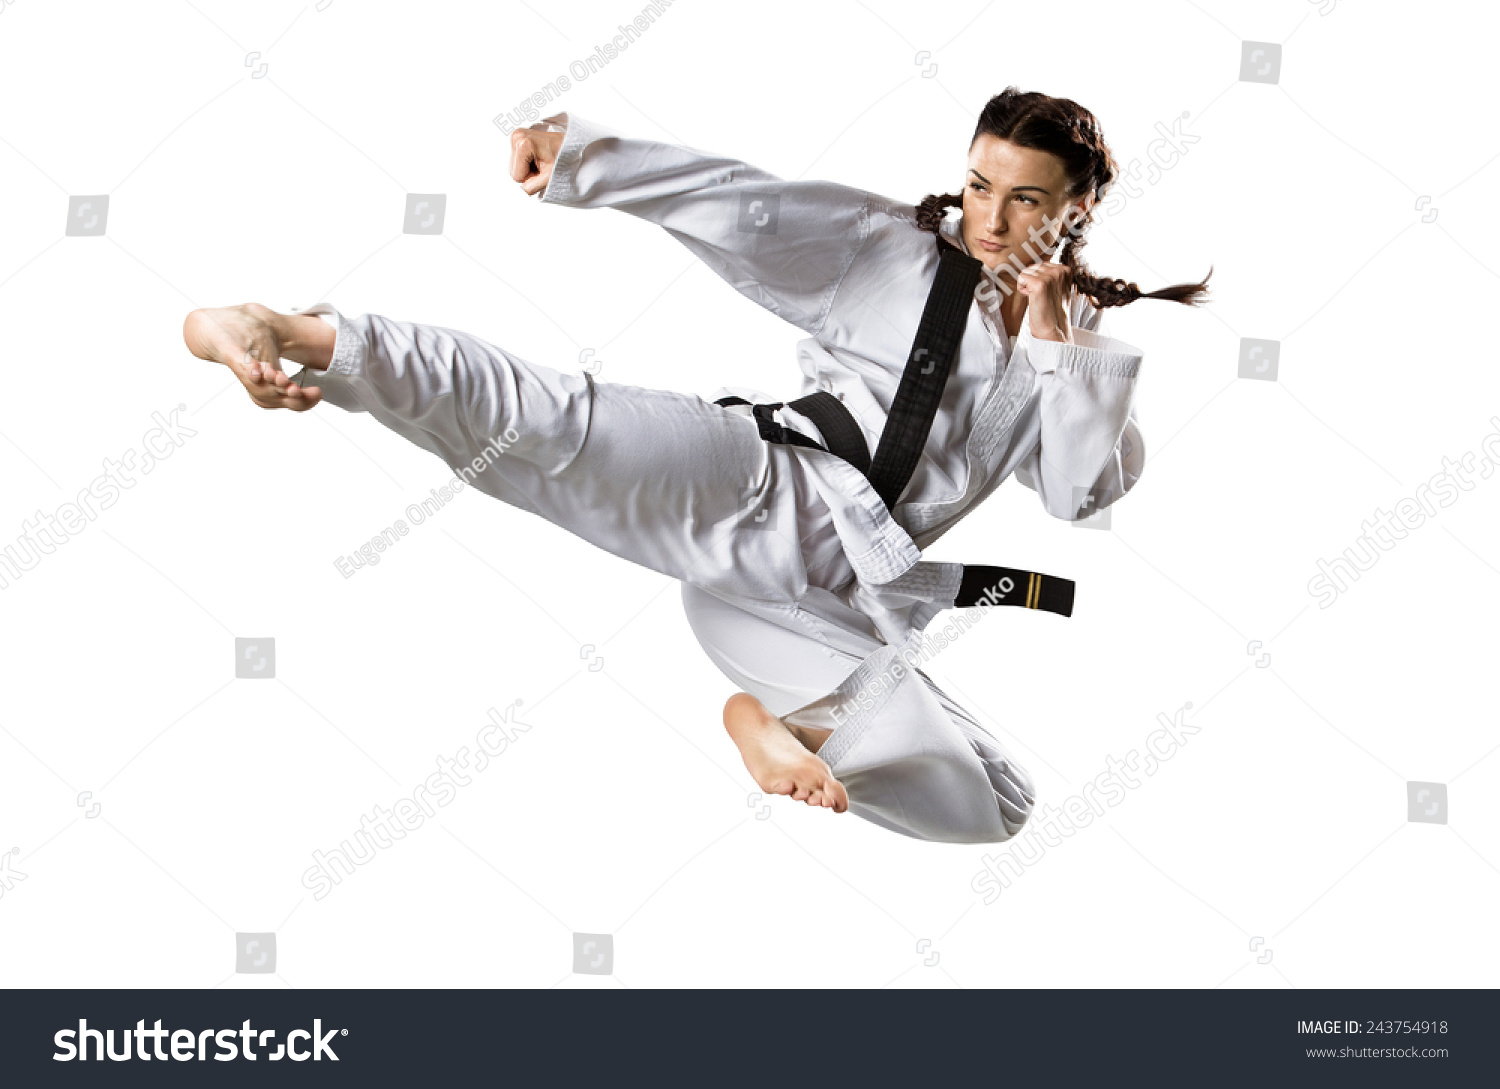 Professional female karate fighter isolated on the white background #243754918